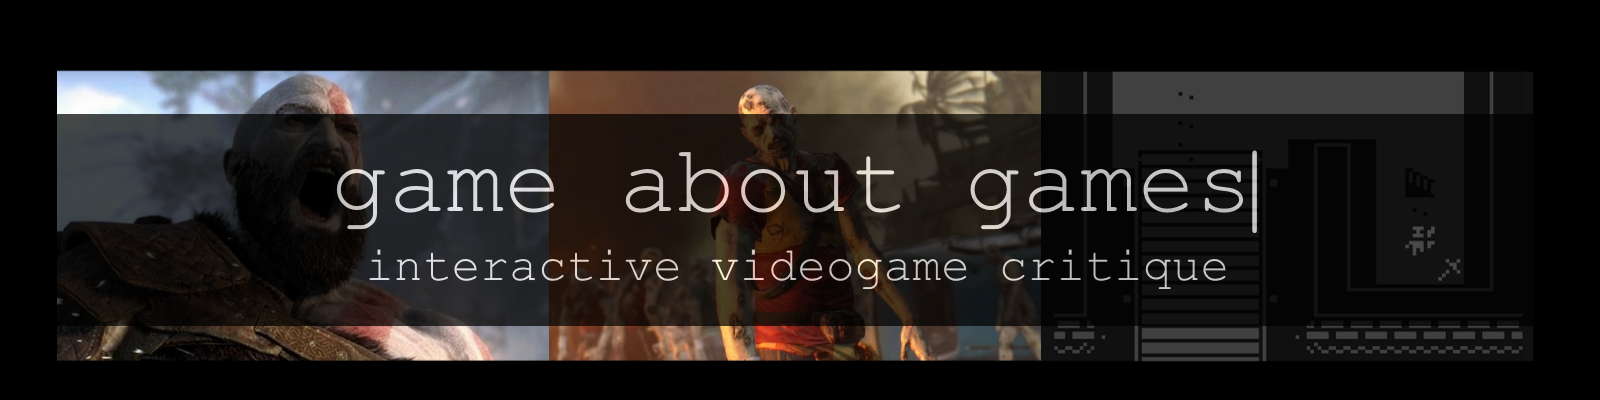 GAME ABOUT GAMES – interactive videogame critique